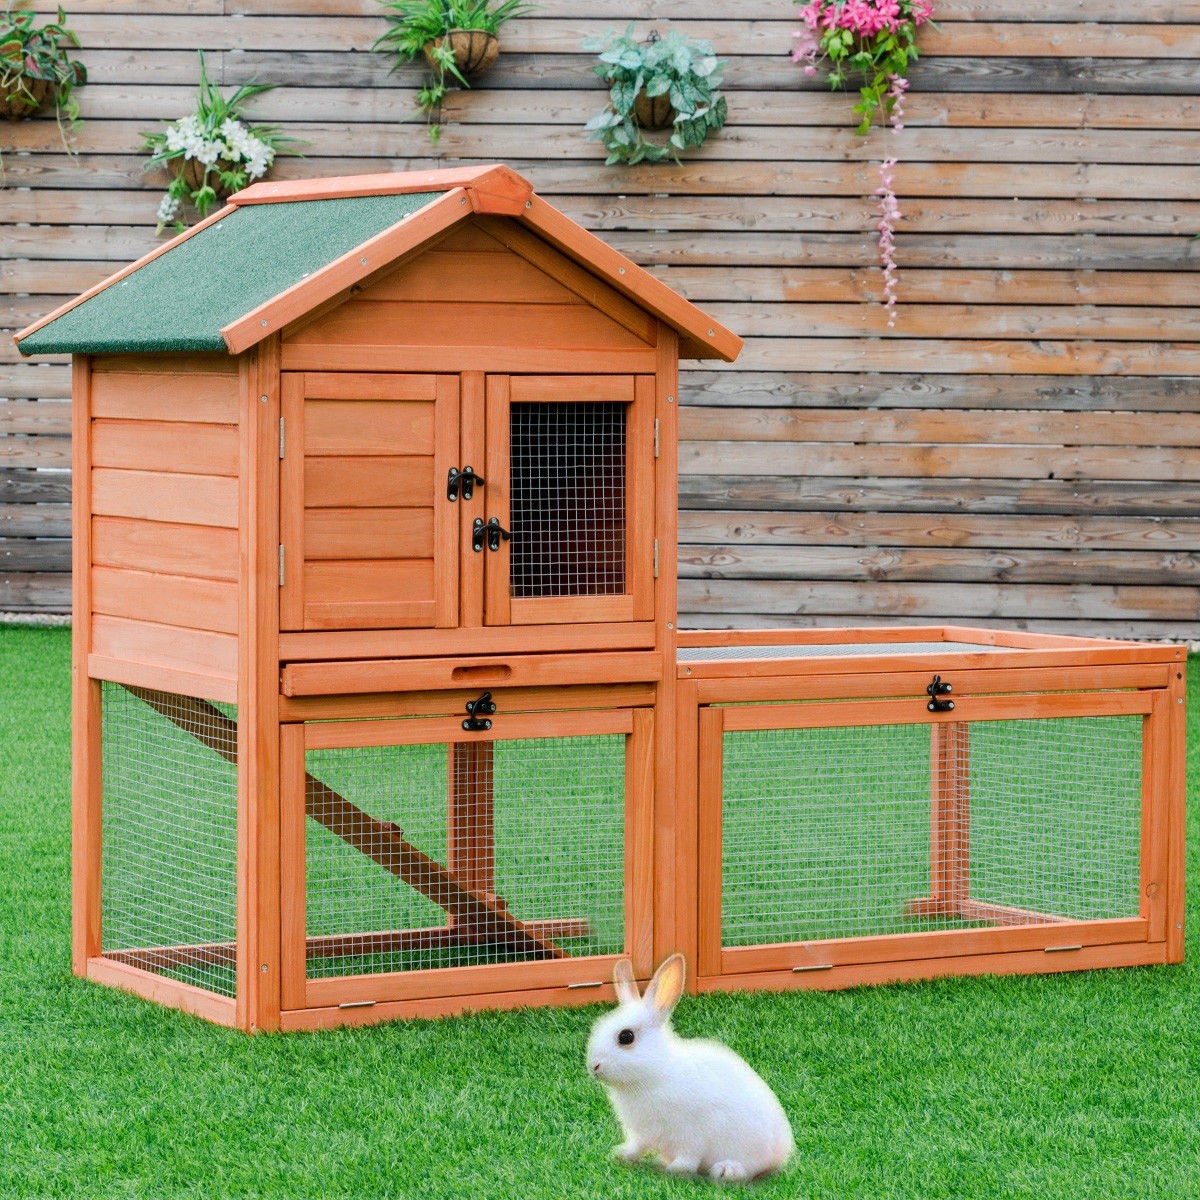 Outdoor Wooden Rabbit Bunny Chicken Coops Cages with Tray